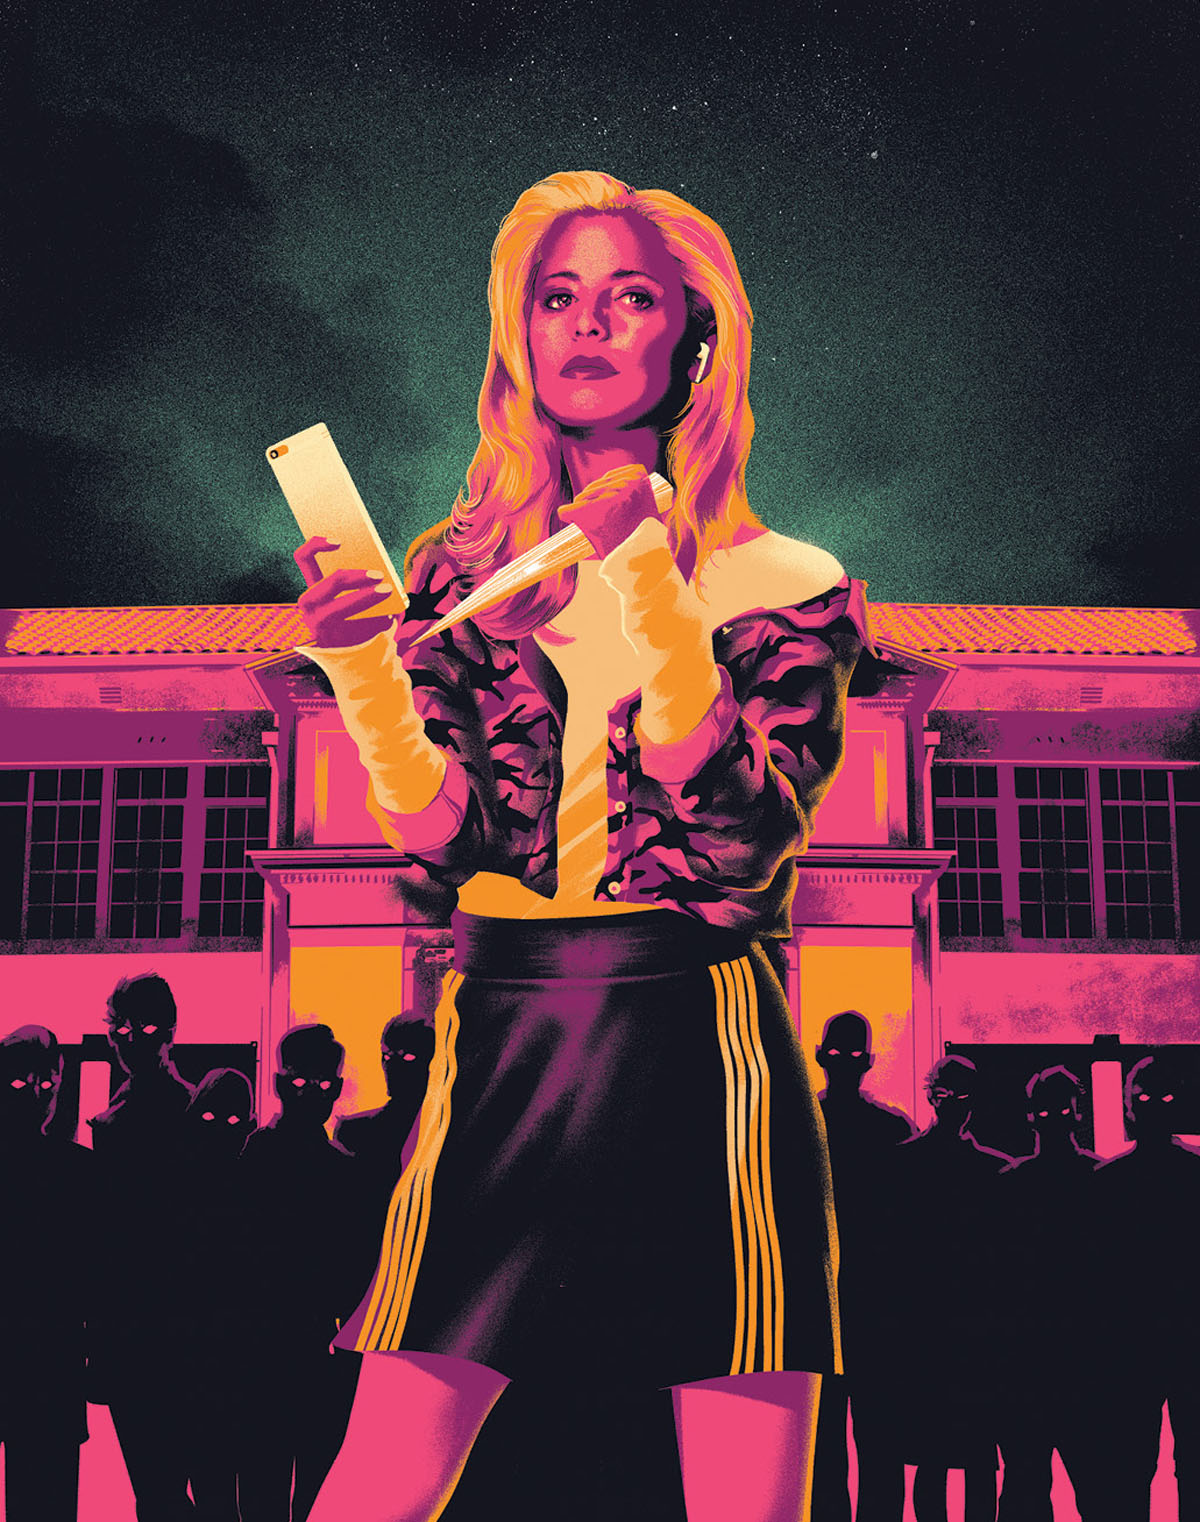 NYCC 2018: Buffy the Vampire Slayer Reboot Comic Brings the Scoobies to the Present